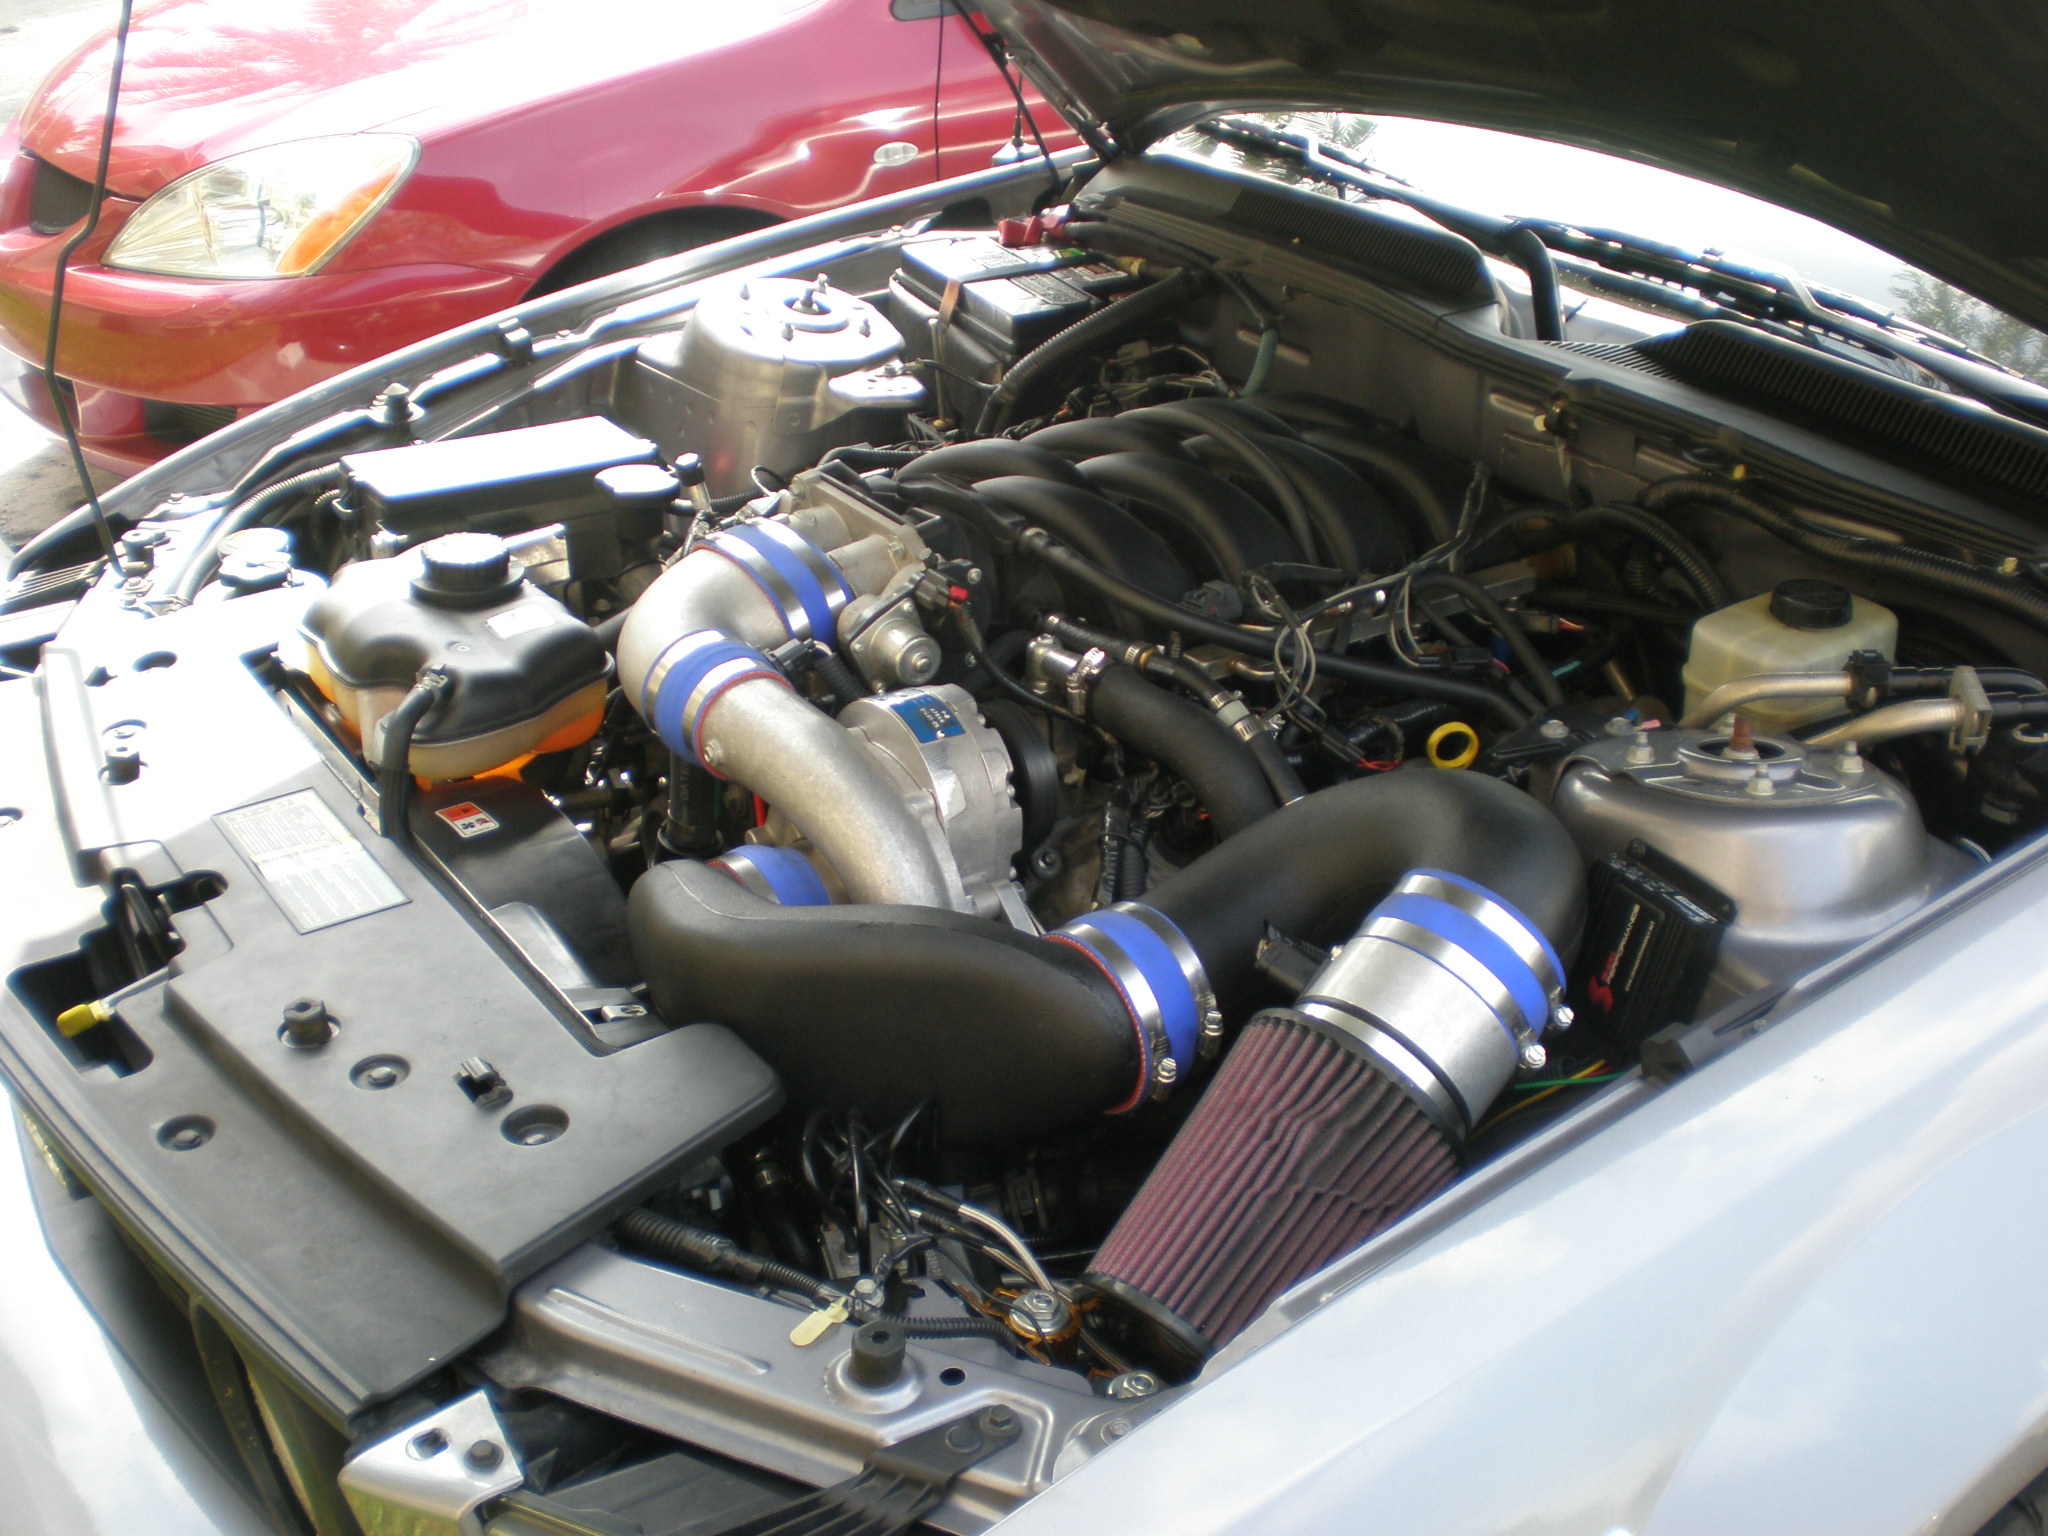  2006 Ford Mustang GT Vortech S-Trim